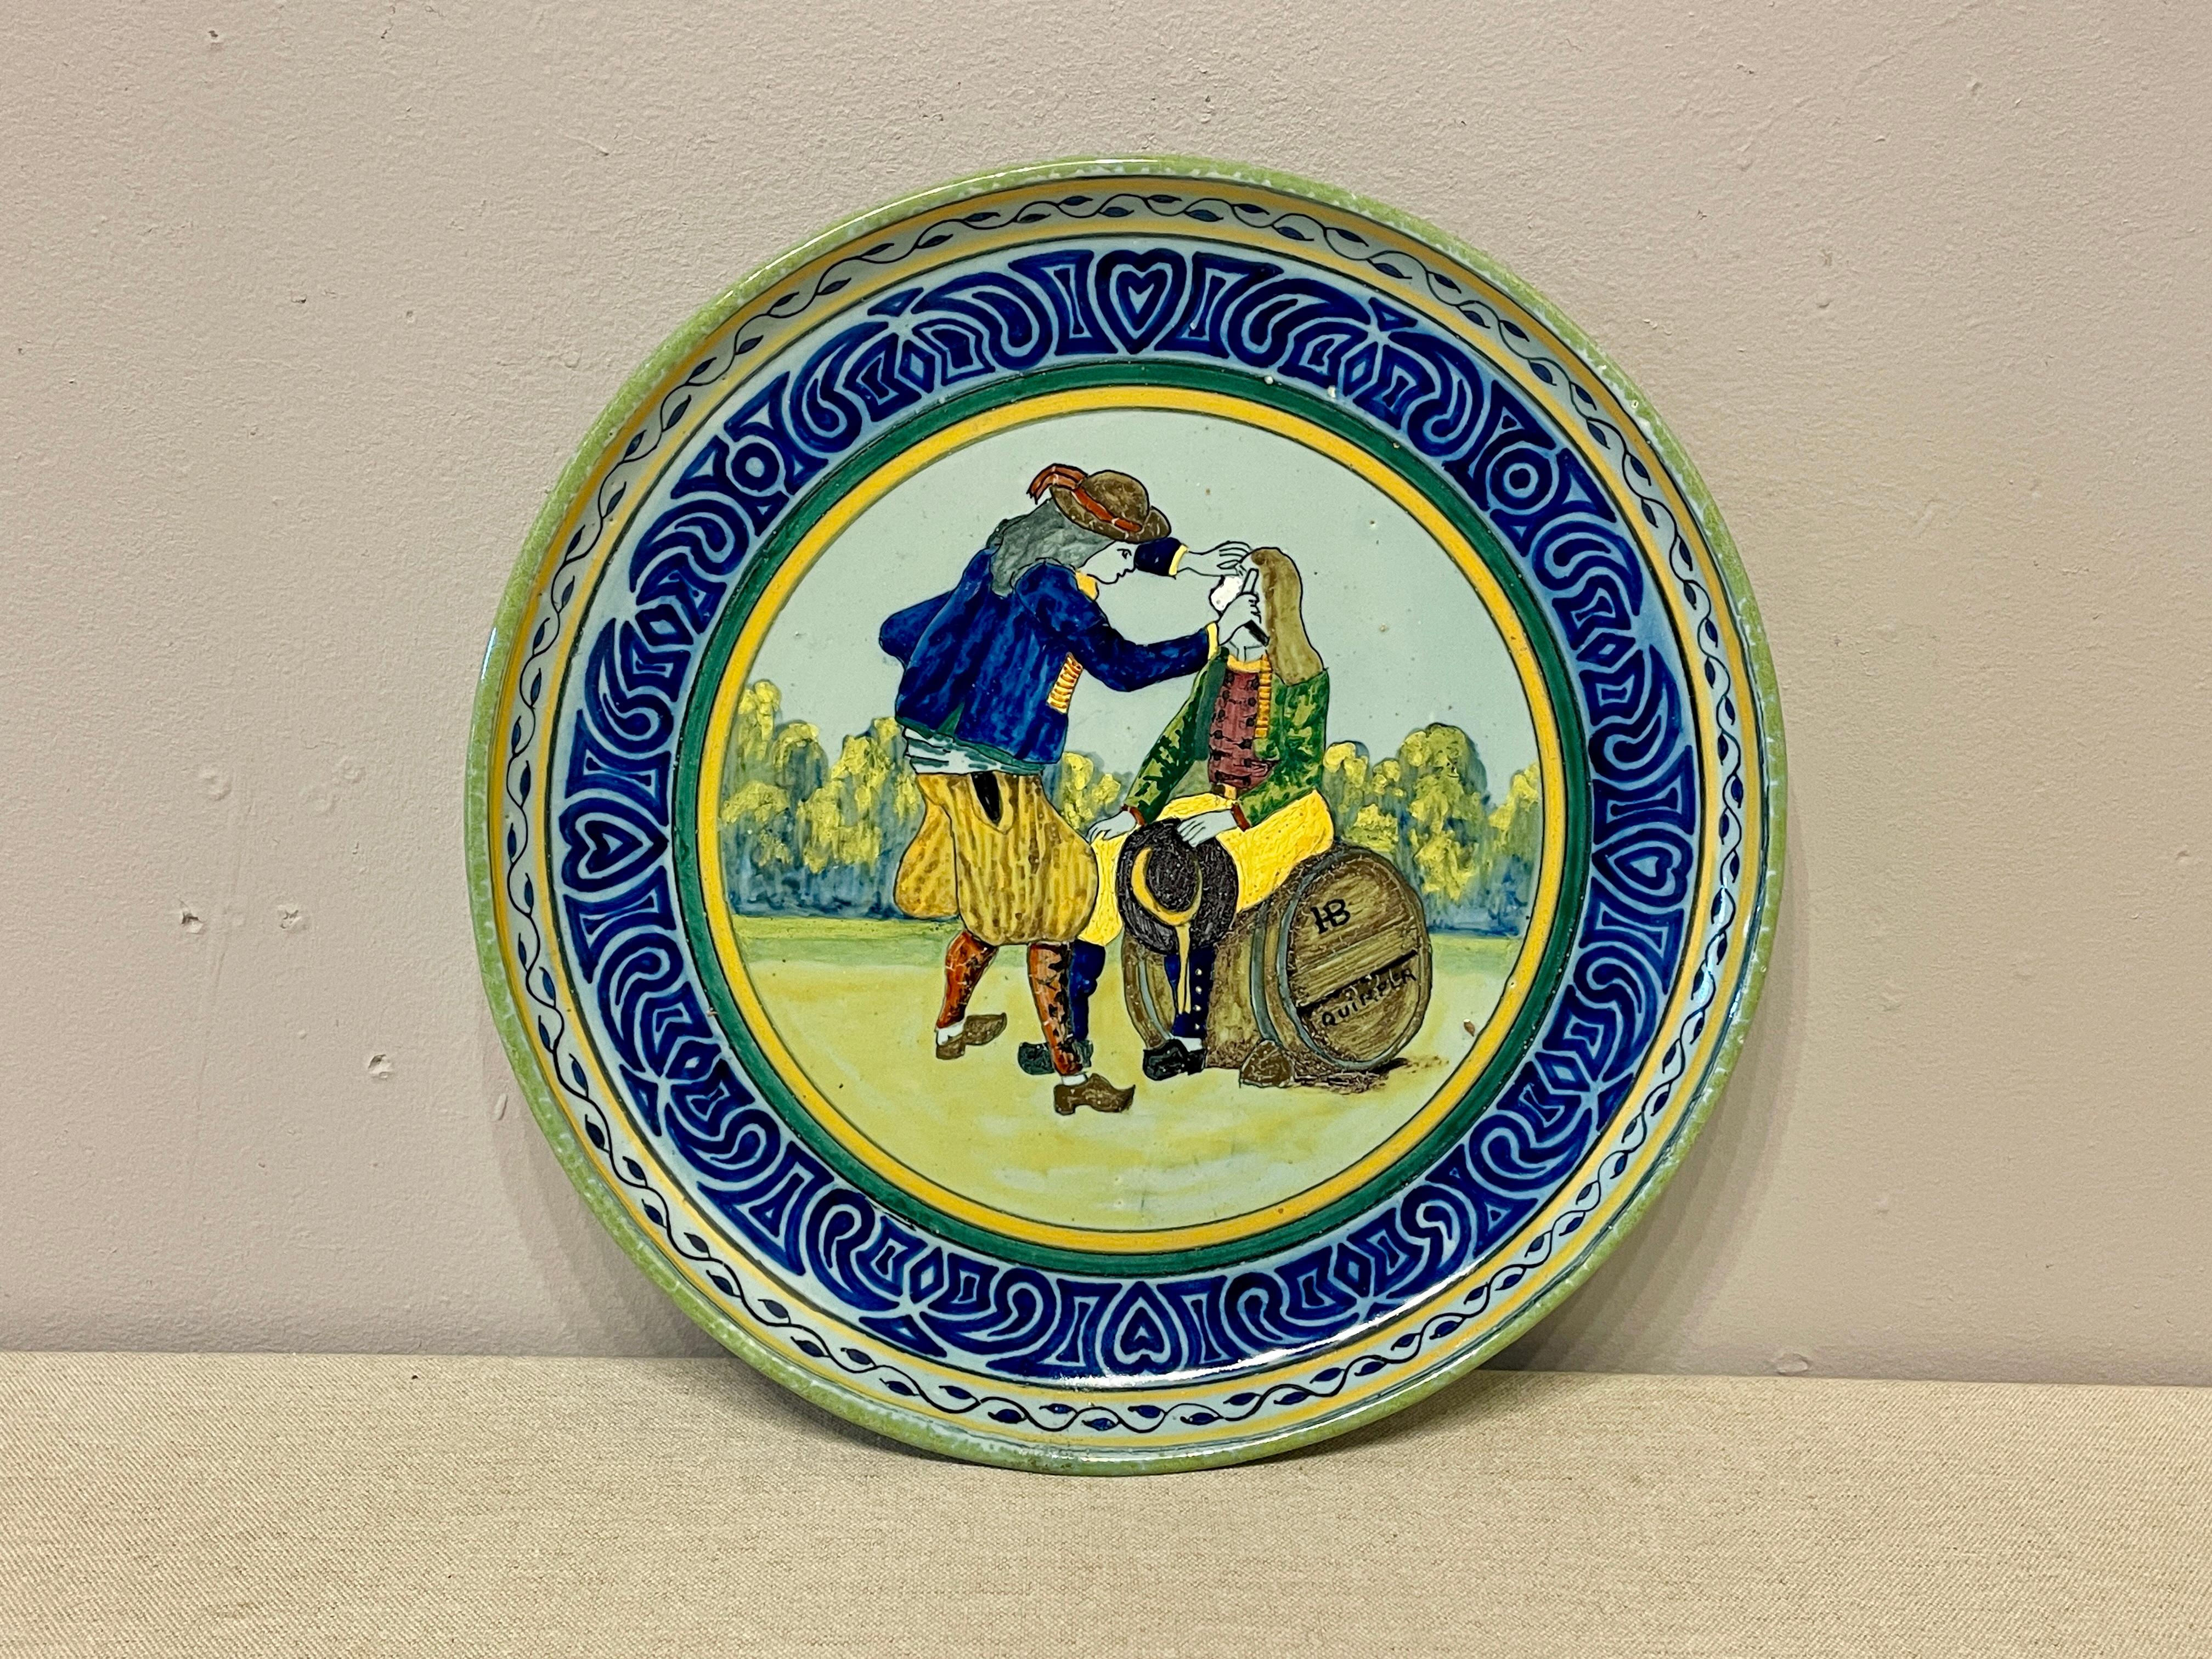 A French large faience platter signed HB Quimper with a blue border, depicting a man shaving another man sitting on a barrel. In great condition with no restorations. Beautiful glazing. circa 1910. 
Dimensions are 12